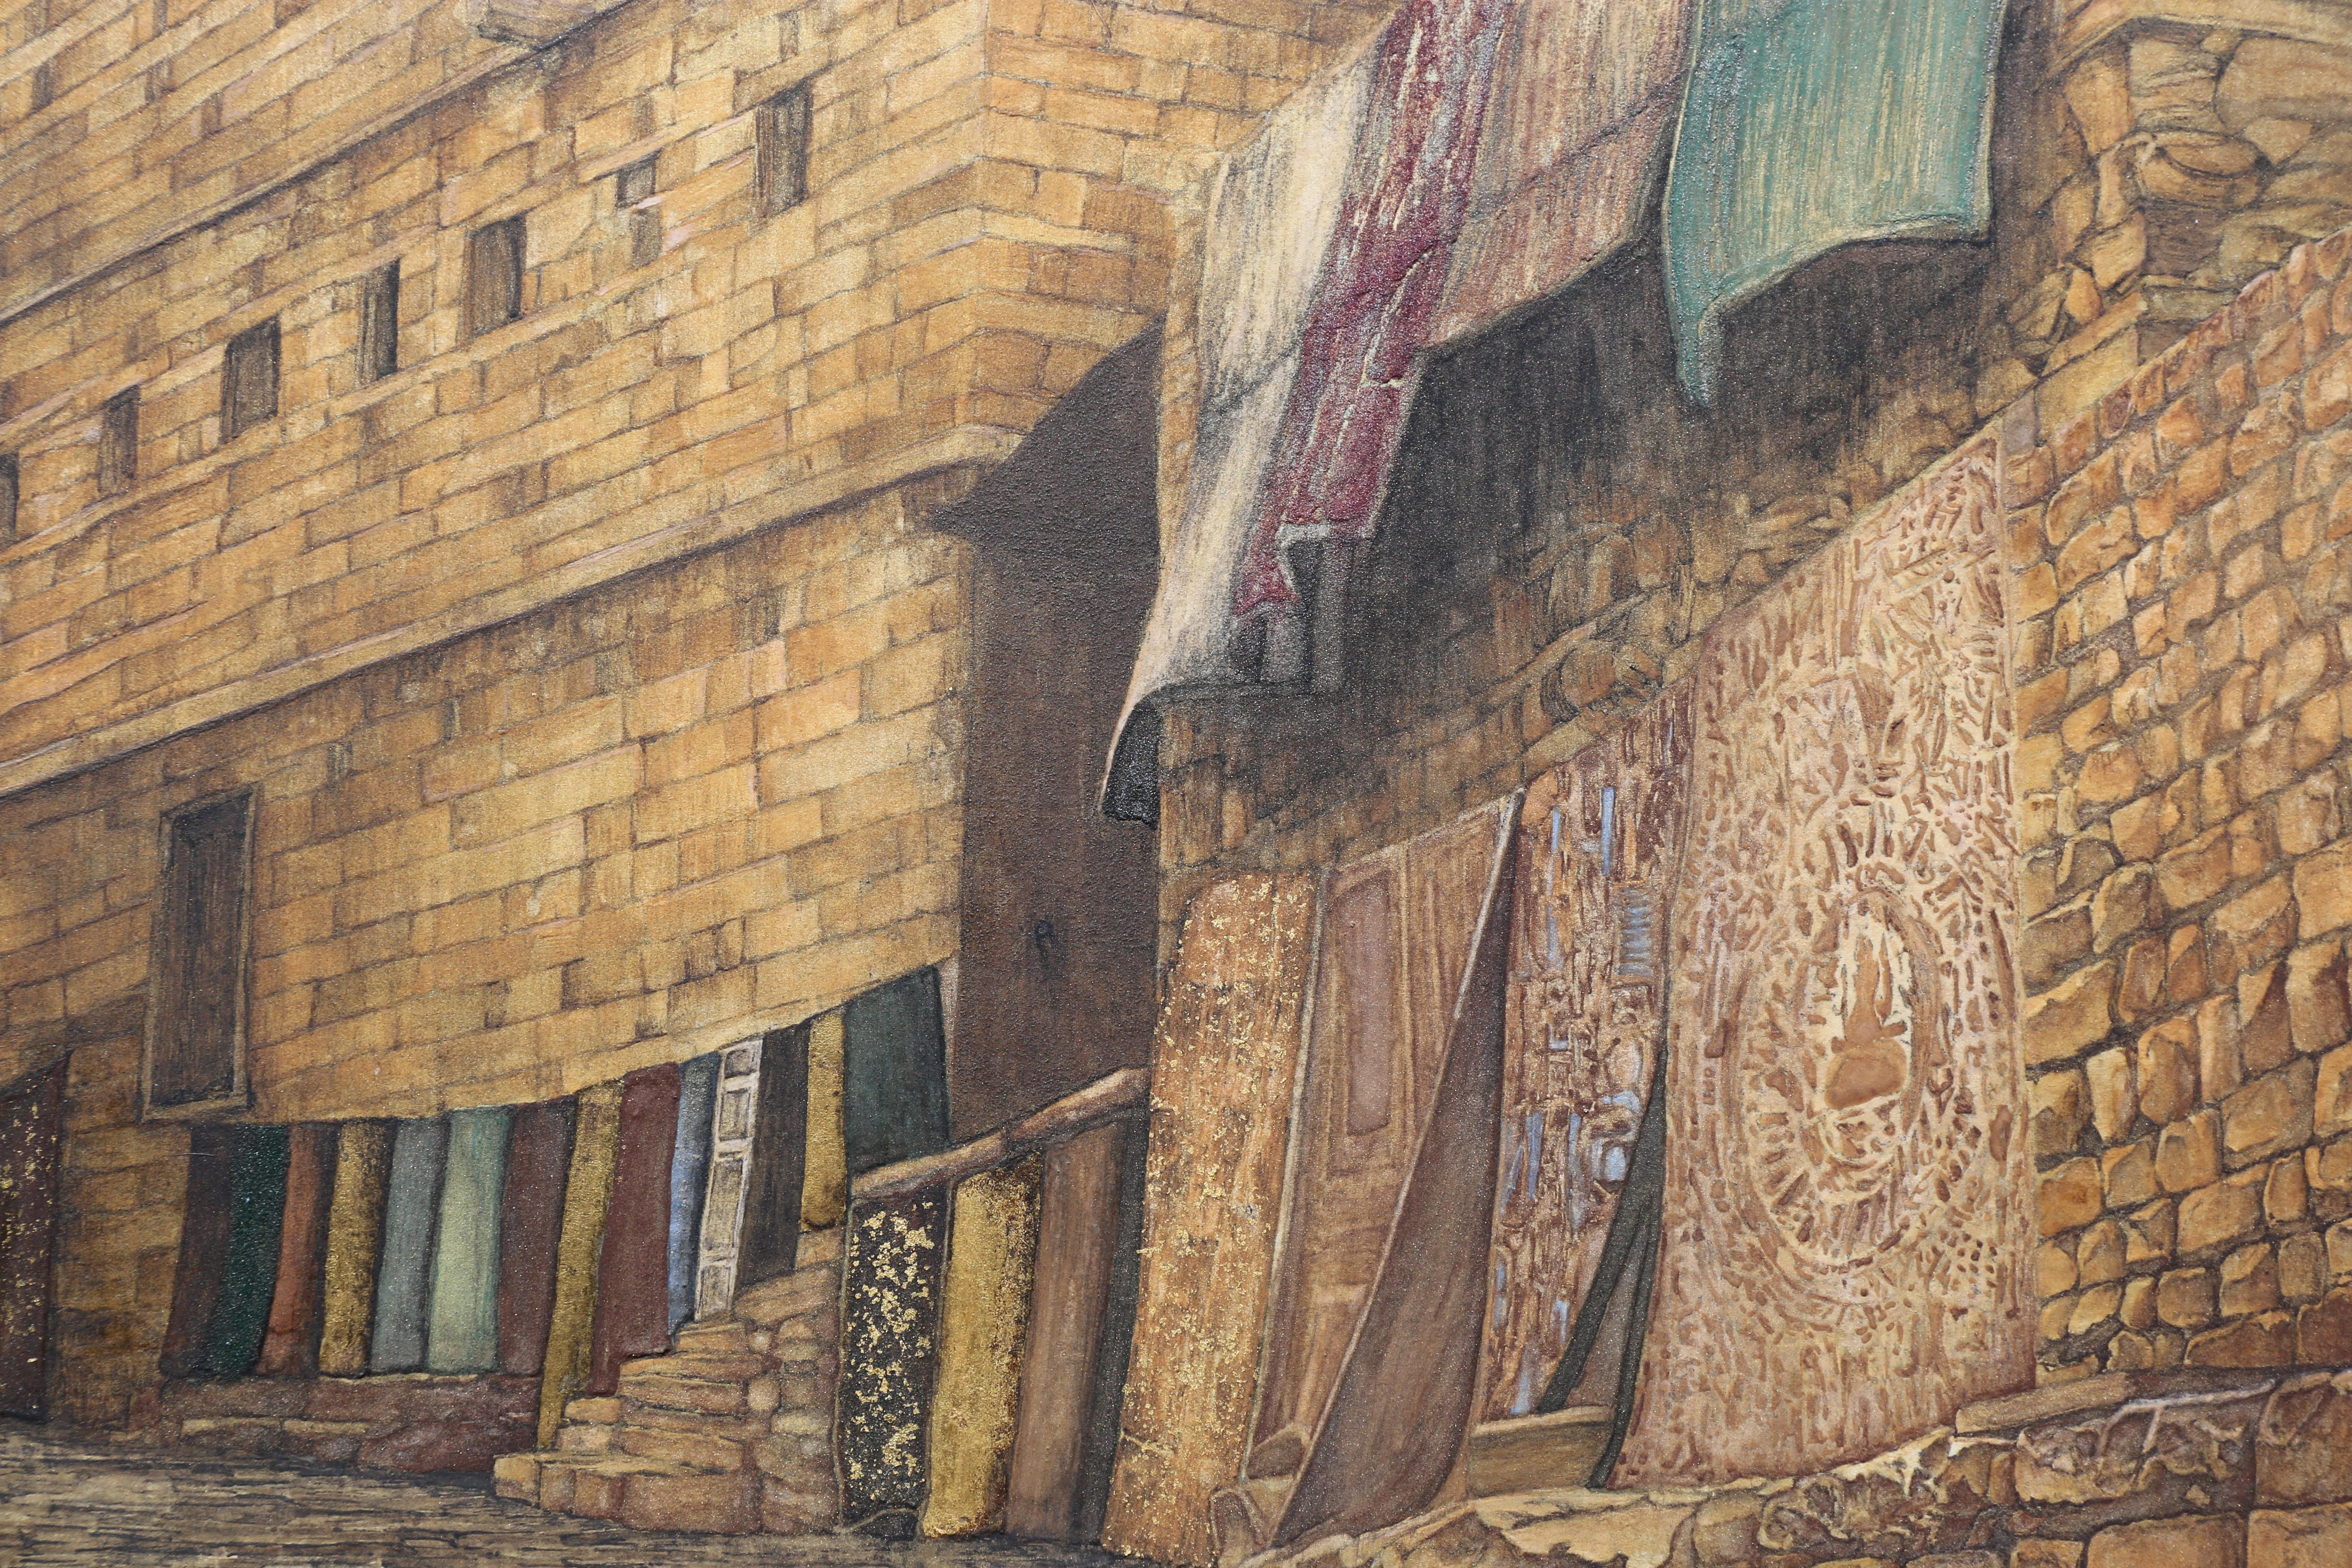 Street of Jaisalmer - Gold Leaf, Mineral and Ores Painting, Streetscape Realism For Sale 2